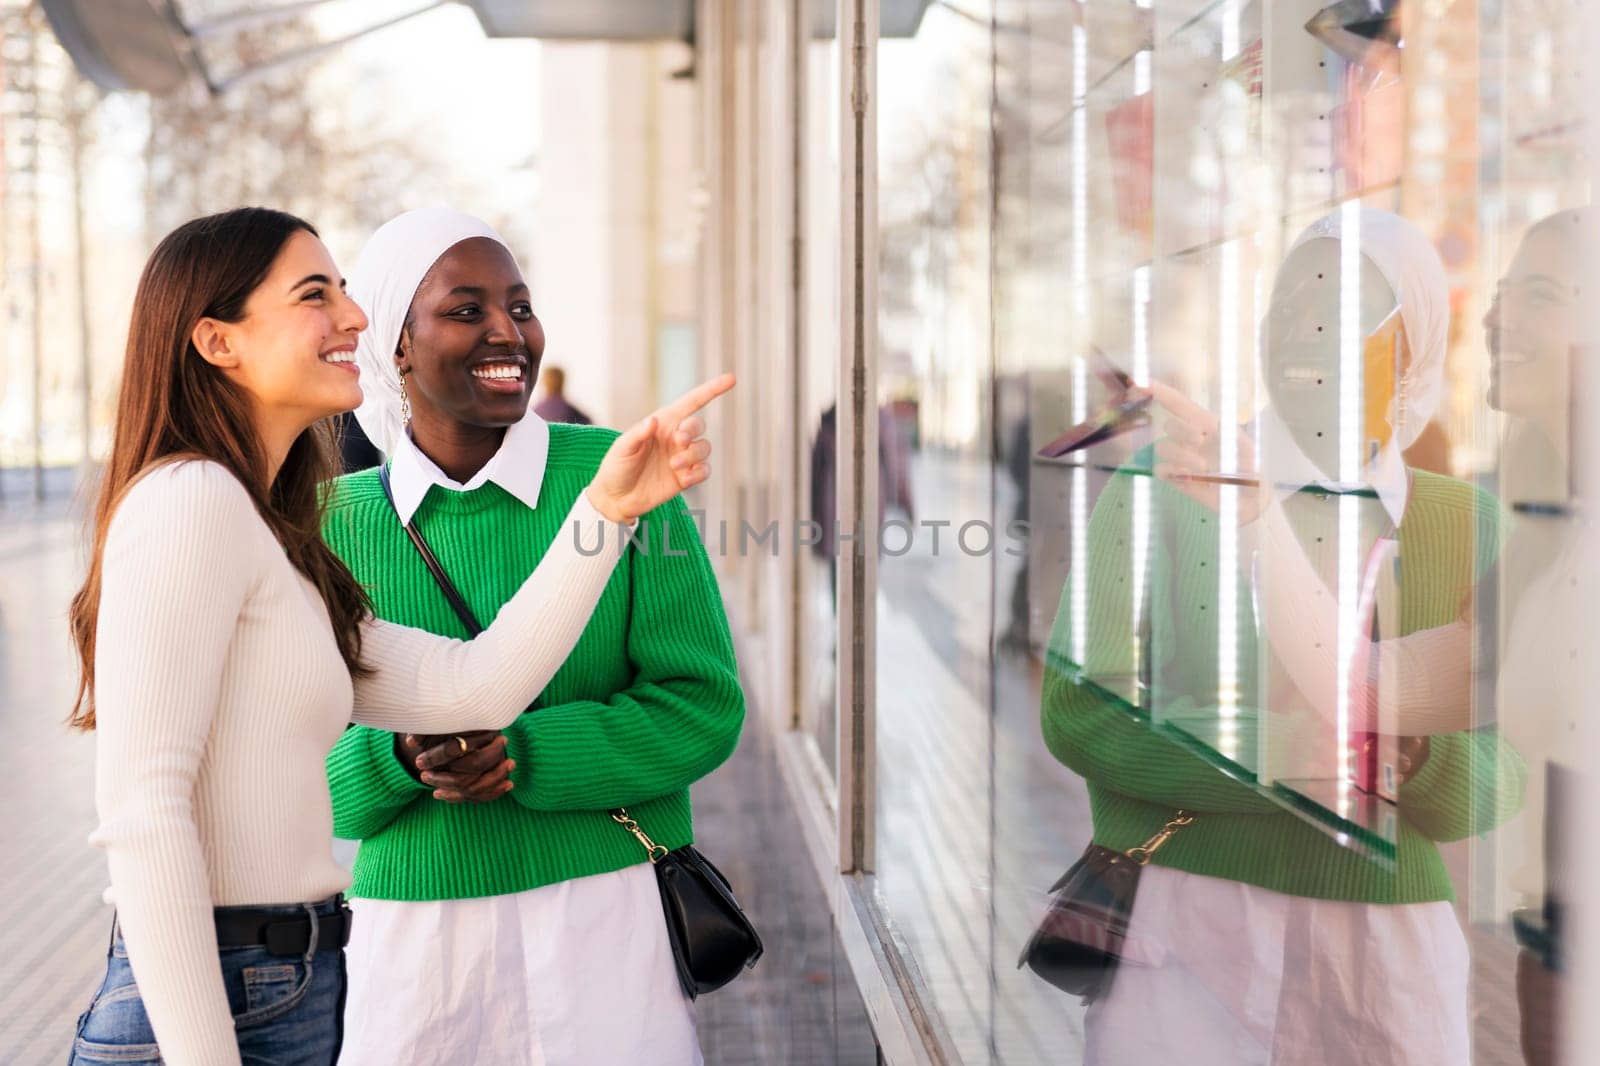 couple of friends smiling looking at a shop window by raulmelldo